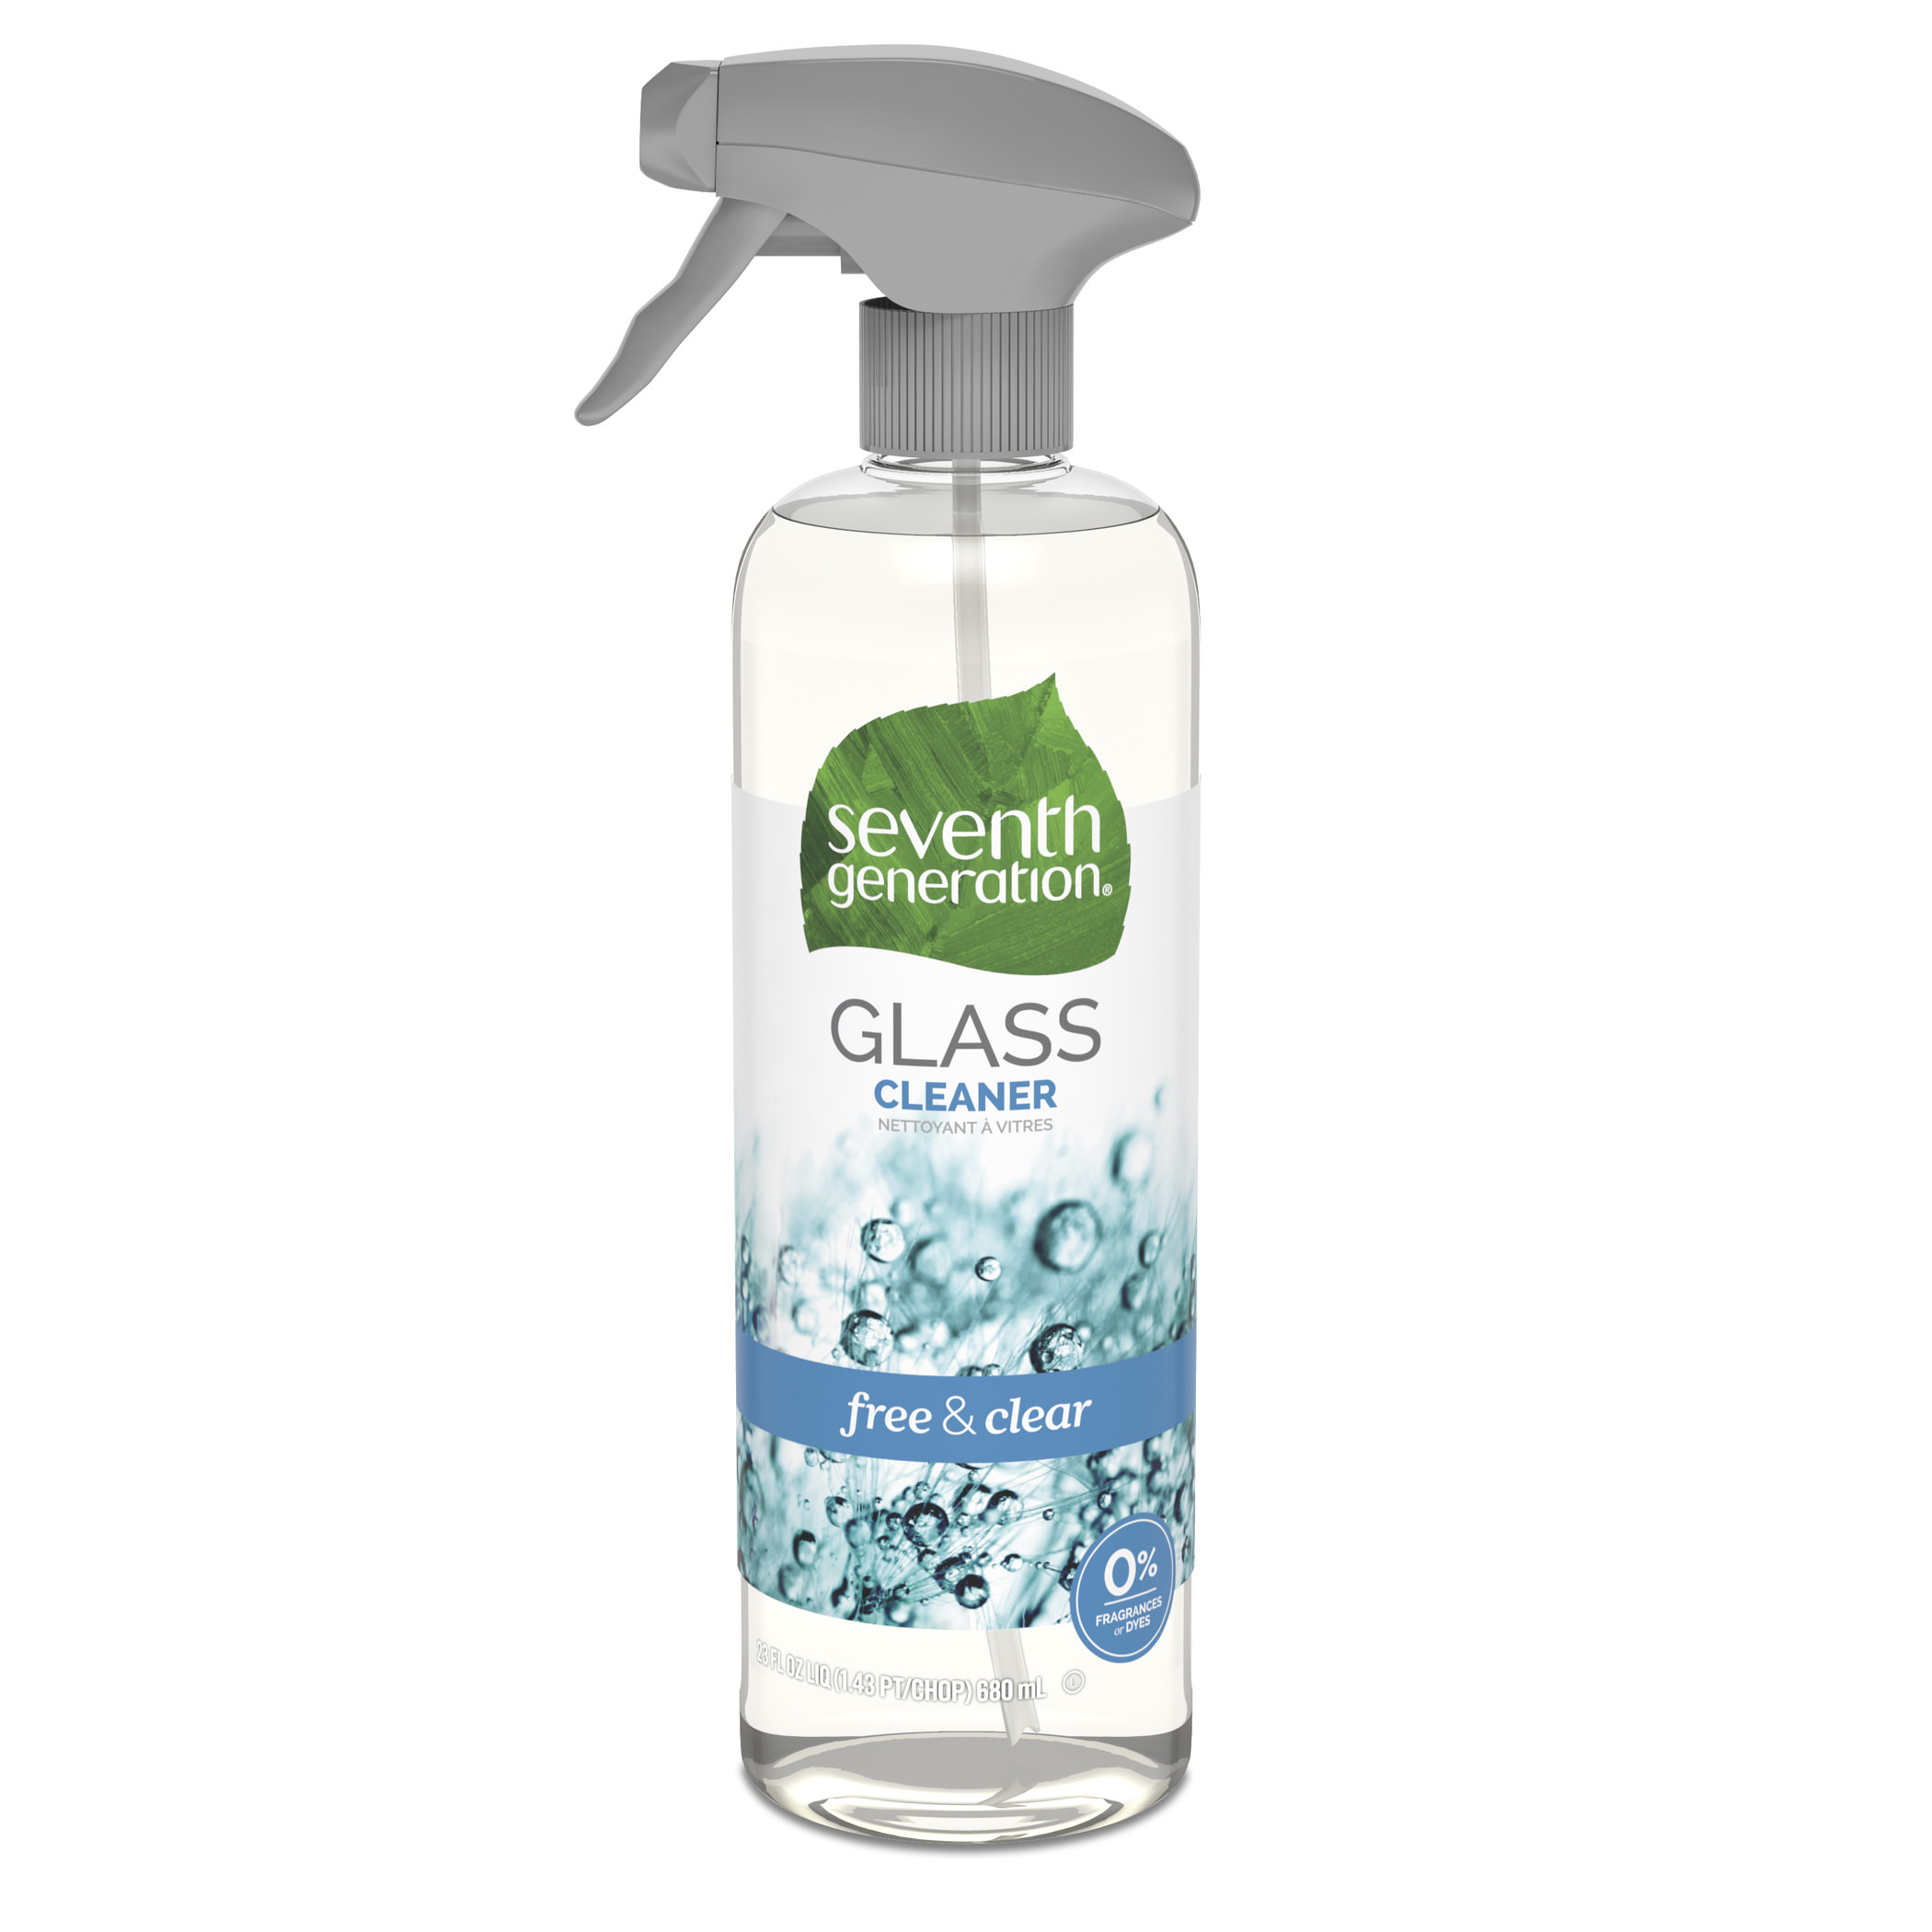 Seventh Generation Glass Cleaner, Free & Clear, 23 oz - image 1 of 6